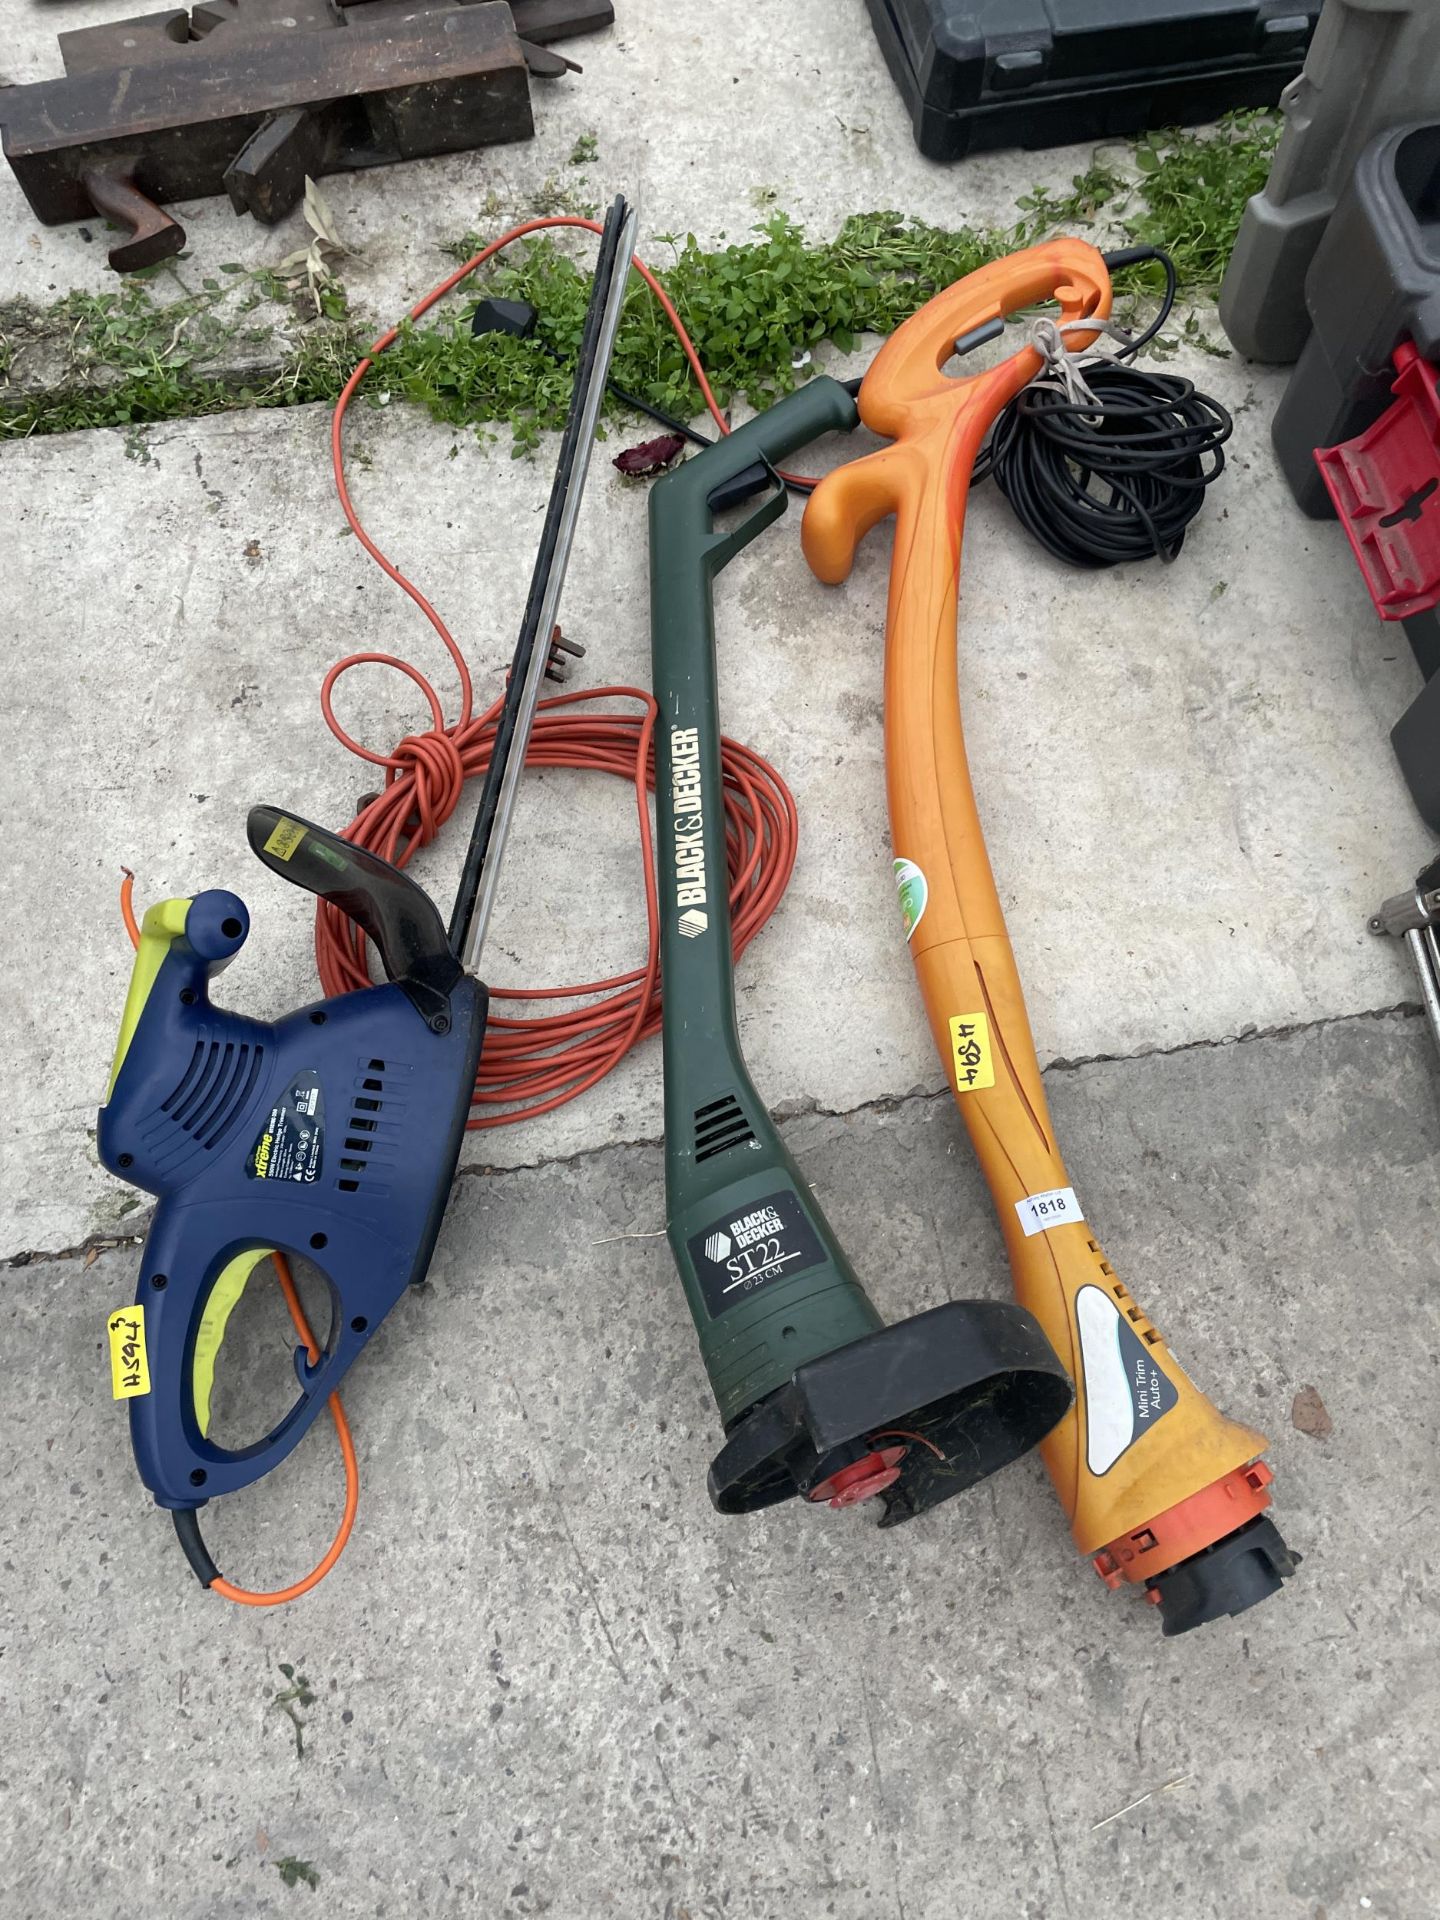 THREE ELECTRIC GARDEN TOOLS TO INCLUDE TWO STRIMMERS AND A XTREME HEDGE CUTTER